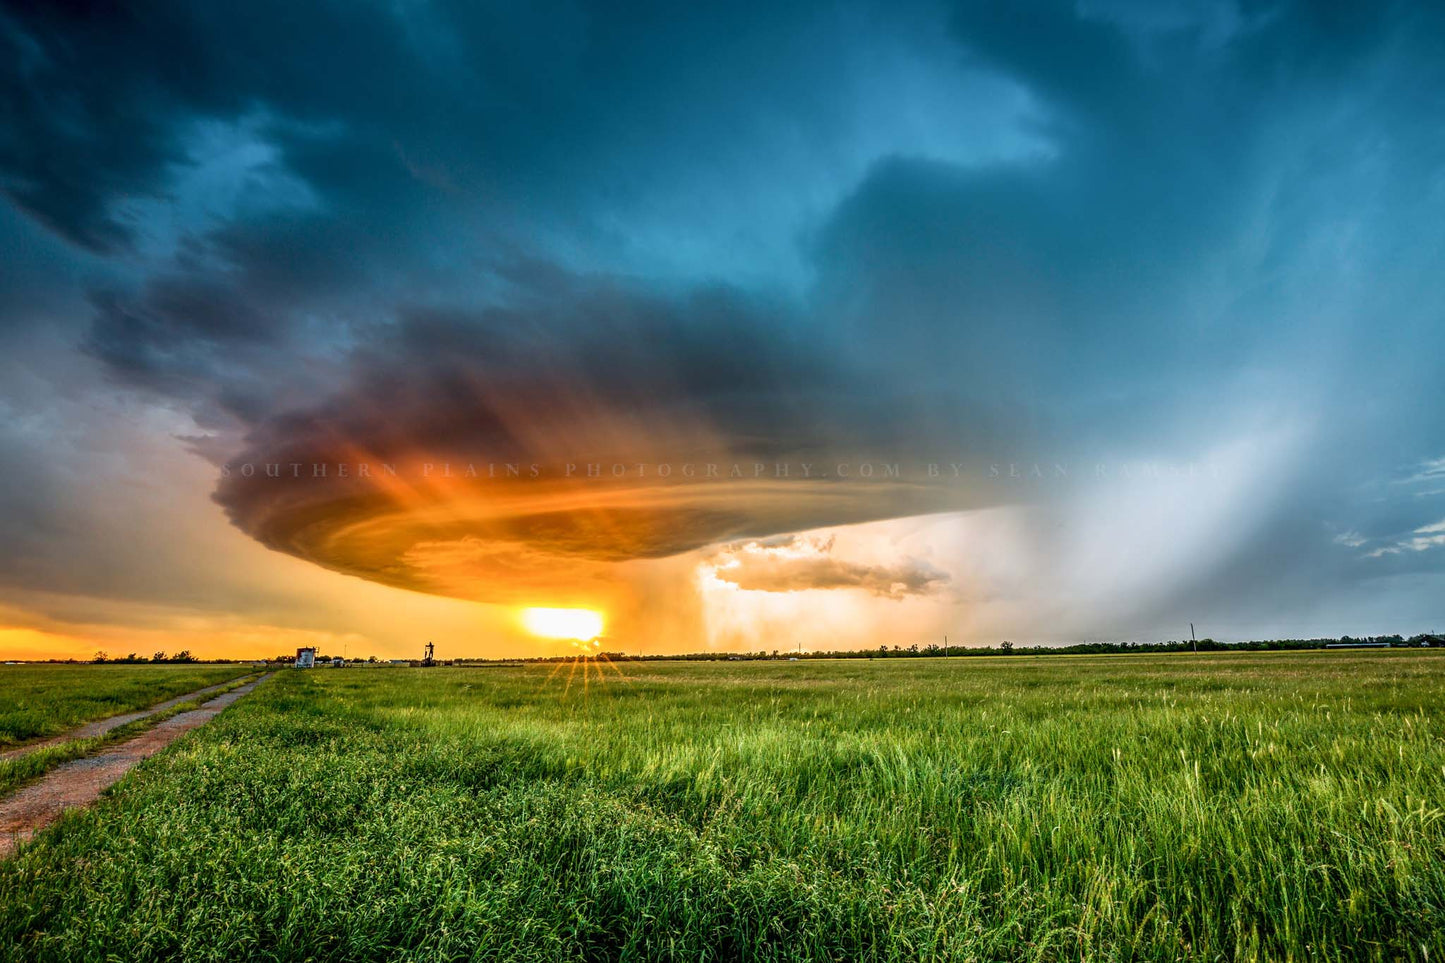 Storm photography print of a supercell thunderstorm illuminated by evening sunlight at sunset on a spring evening in Oklahoma by Sean Ramsey of Southern Plains Photography.